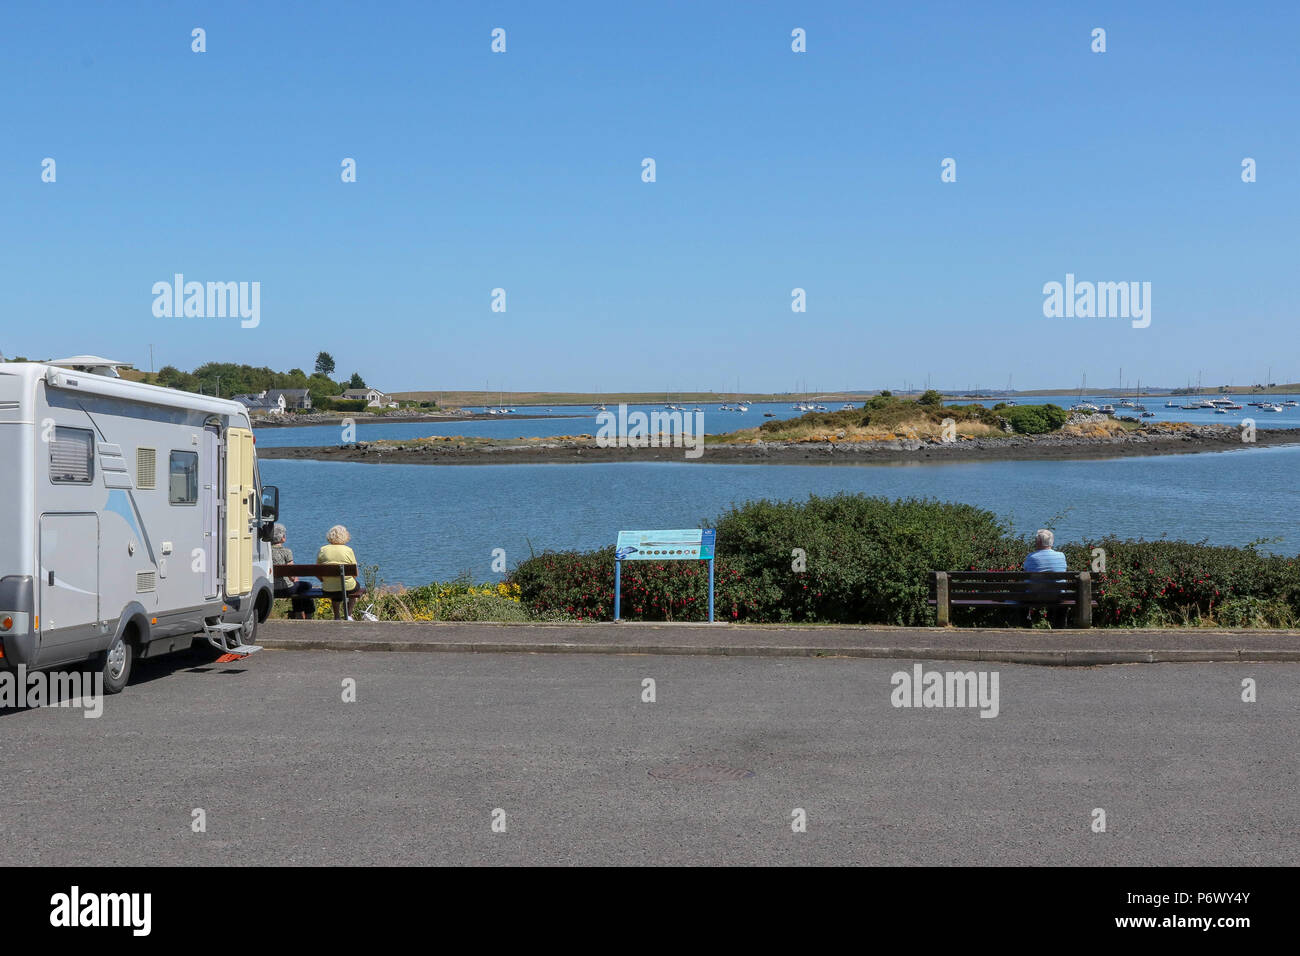 Strangford Lough, County Down, Northern Ireland. 03 July 2018. UK weather - another glorious warm day in the ongoing heatwave.Temperatures were once again in the low 20s with few clouds visible in the blue sky. A day for savouring the view over Strangford Lough at Whiterock, Killinchy. Credit: David Hunter/Alamy Live News. Stock Photo